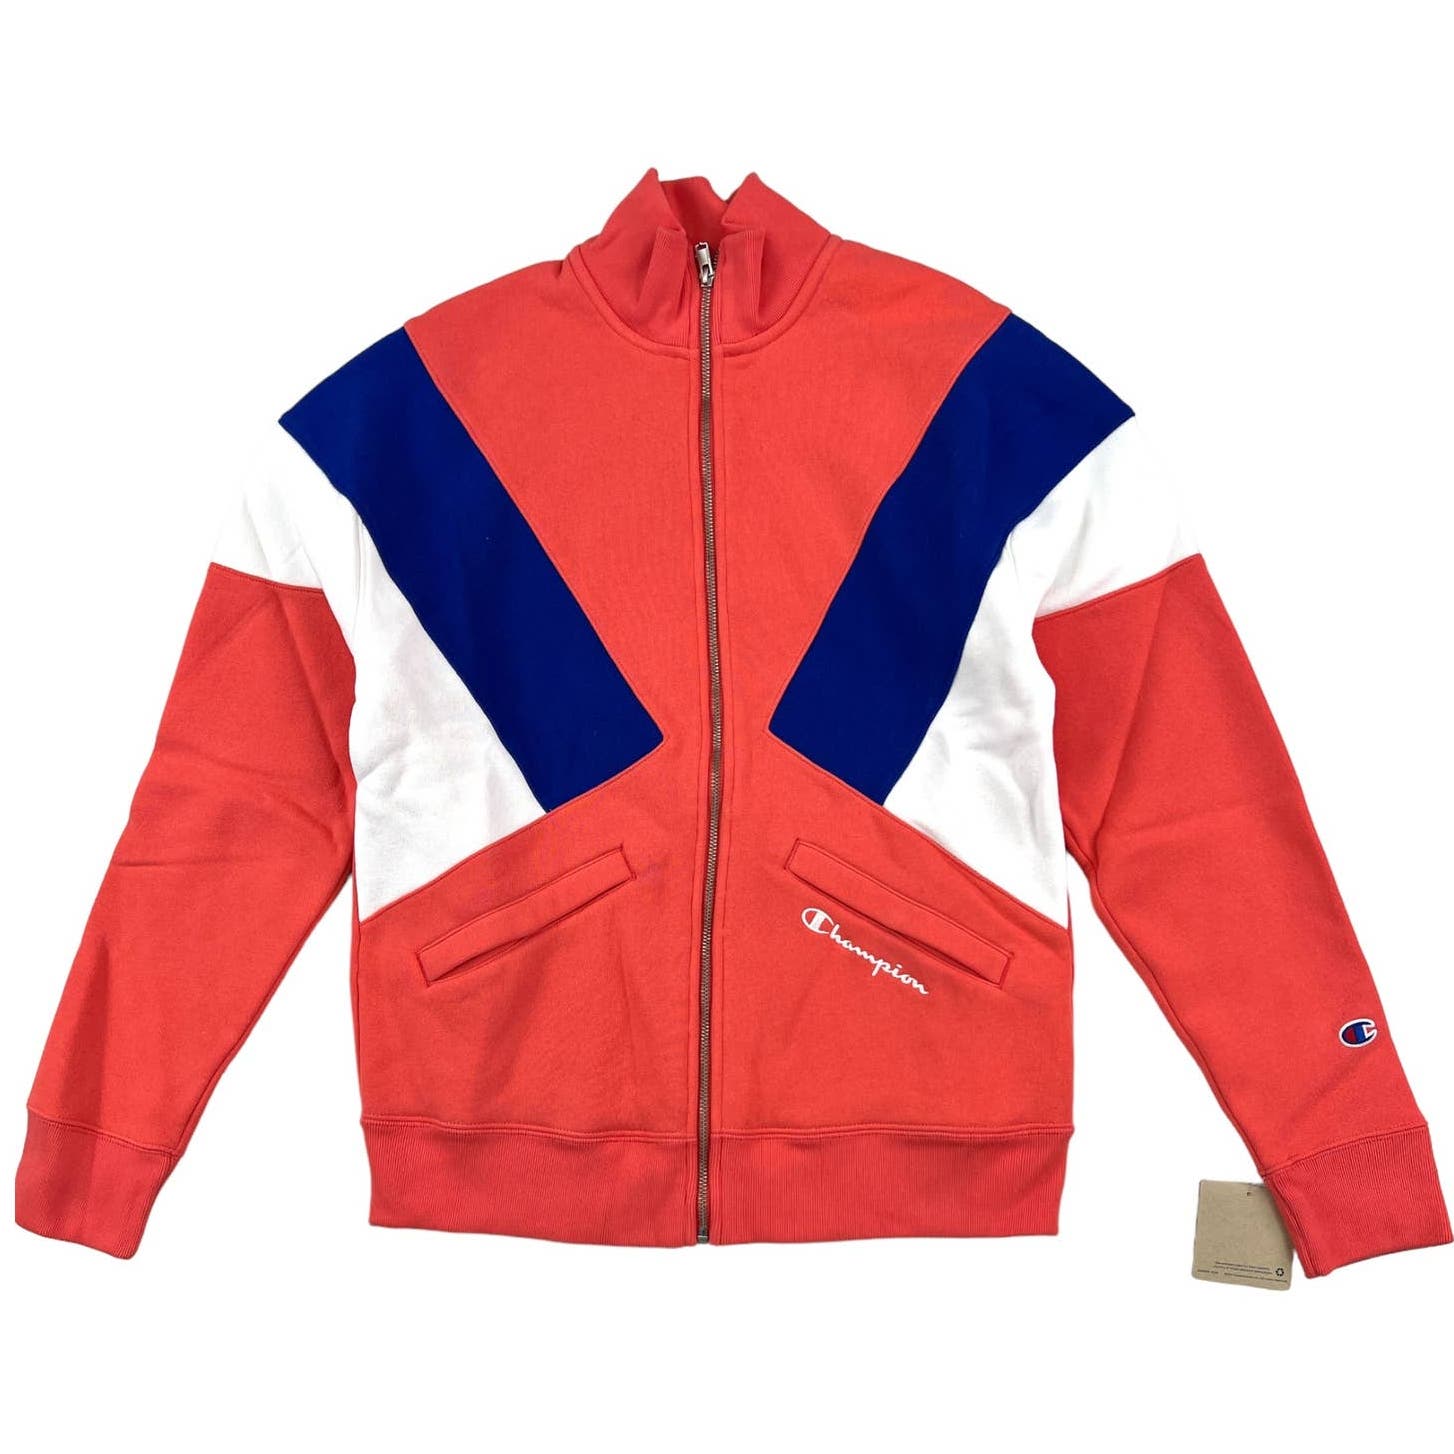 Champion Women US S Red Coral Full Zip Jacket Sport Training